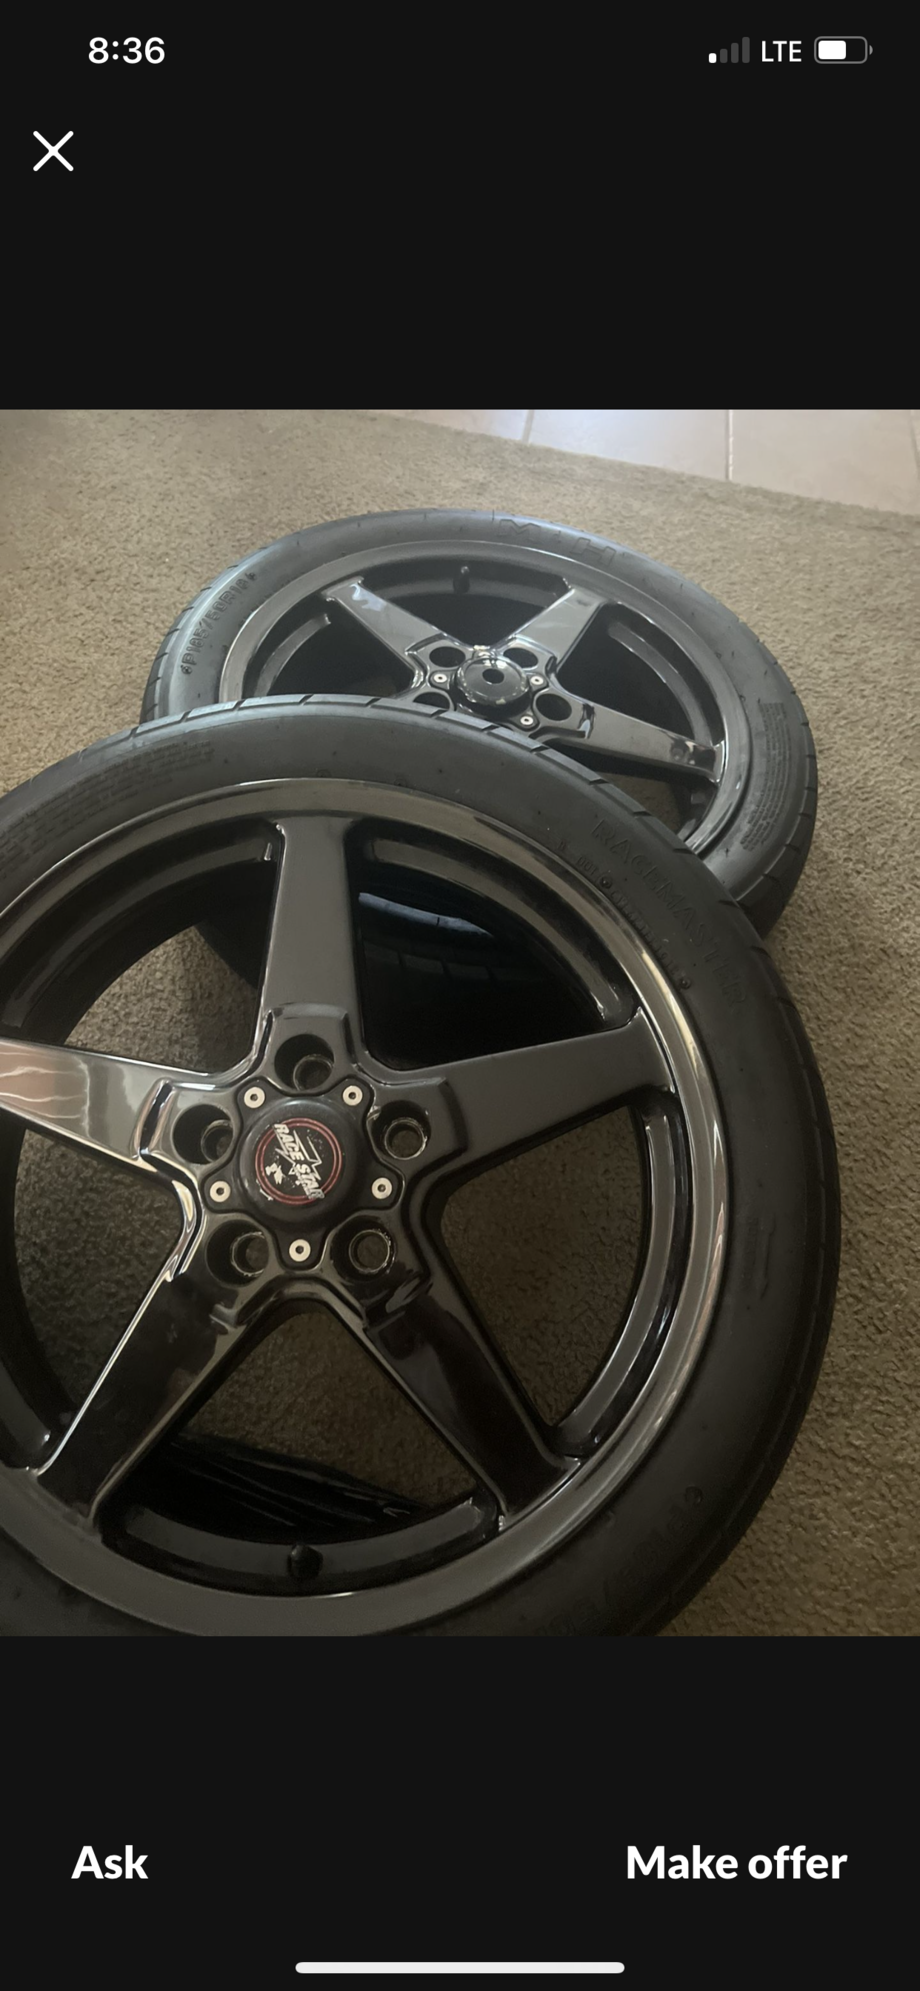 Wheels and Tires/Axles - Drag wheel setup - Used - All Years Any Make All Models - Lancaster, CA 93534, United States